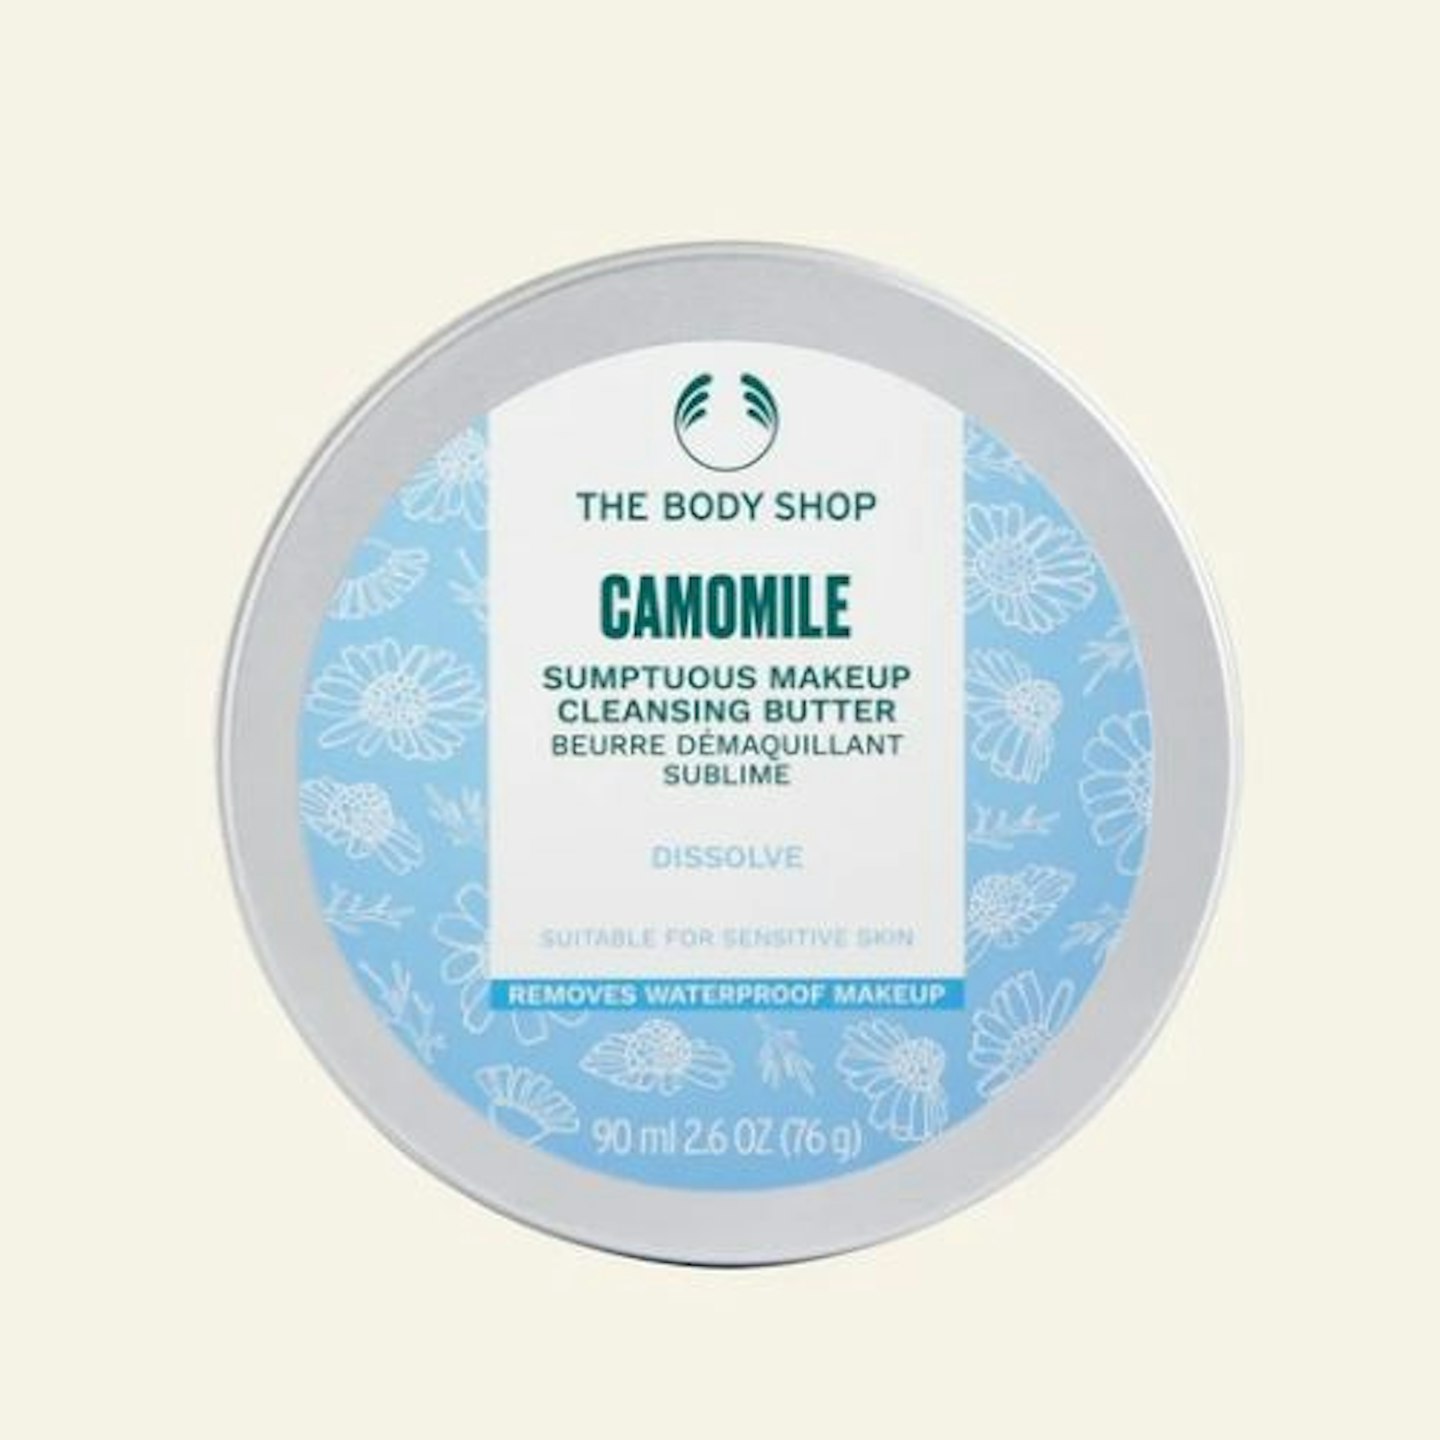 The Body Shop Camomile Sumptuous Makeup Cleansing Butter